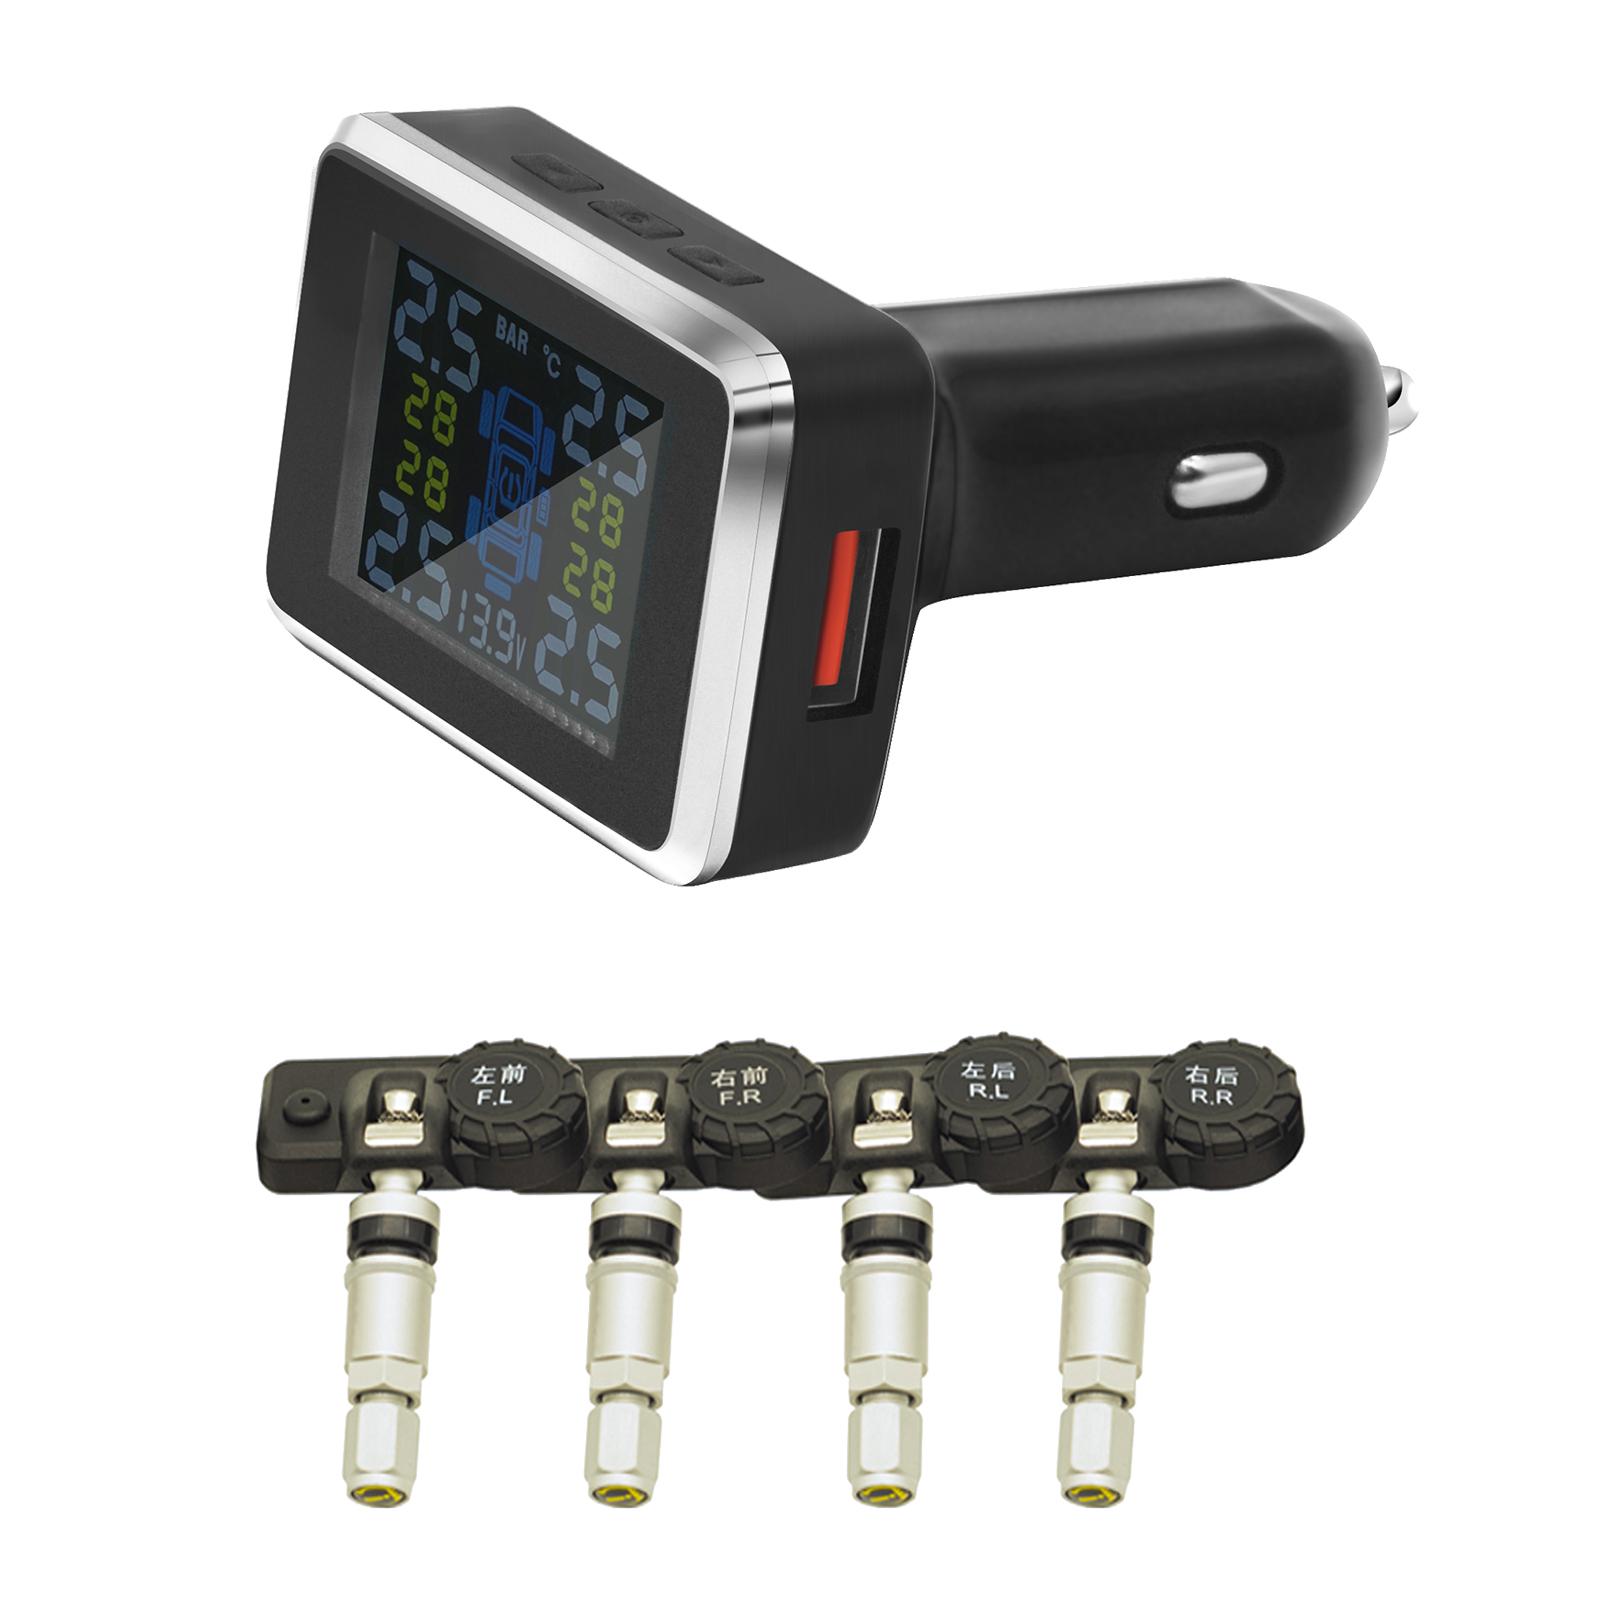 Tire Pressure Monitoring System TPMS USB Charging Port Fits for MPV SUV Built in 